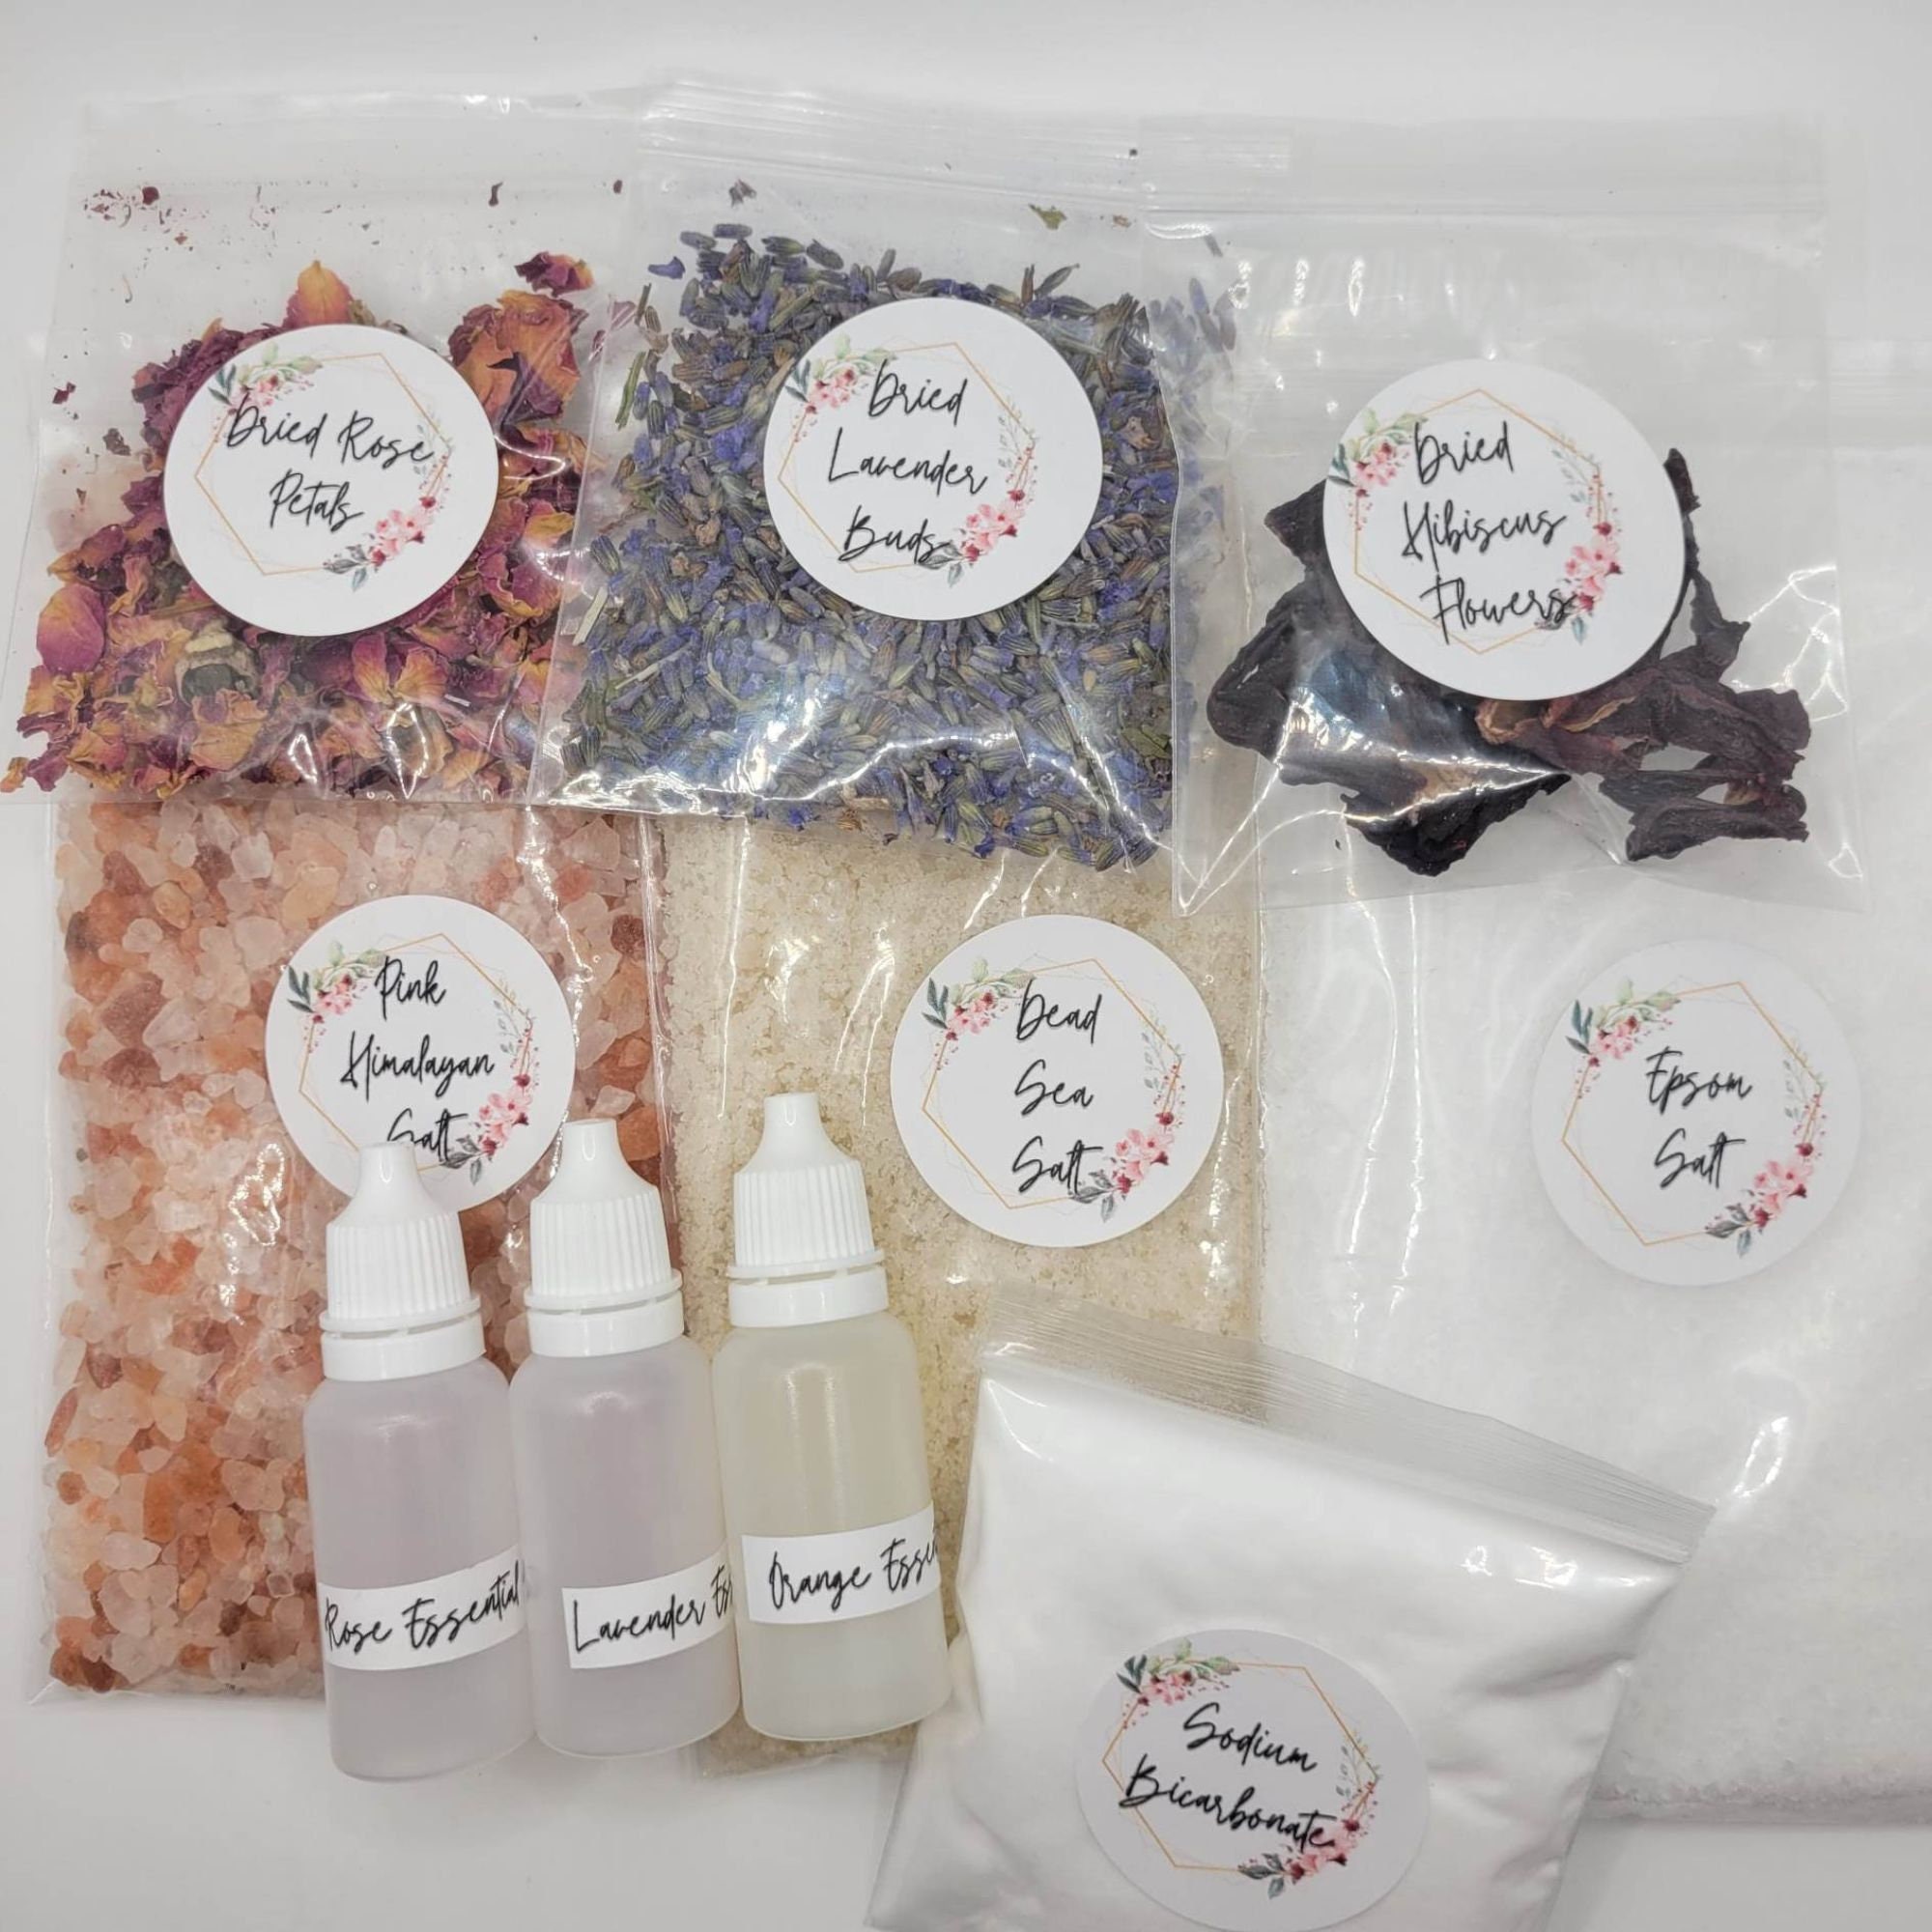 DIY Gift Kits Bath Bomb Kit (Deluxe) 8 All Natural Essential Oils and  Recipe Pack Makes 12+ DIY Cupcake Mold Bath Bombs, Gift Box Included.